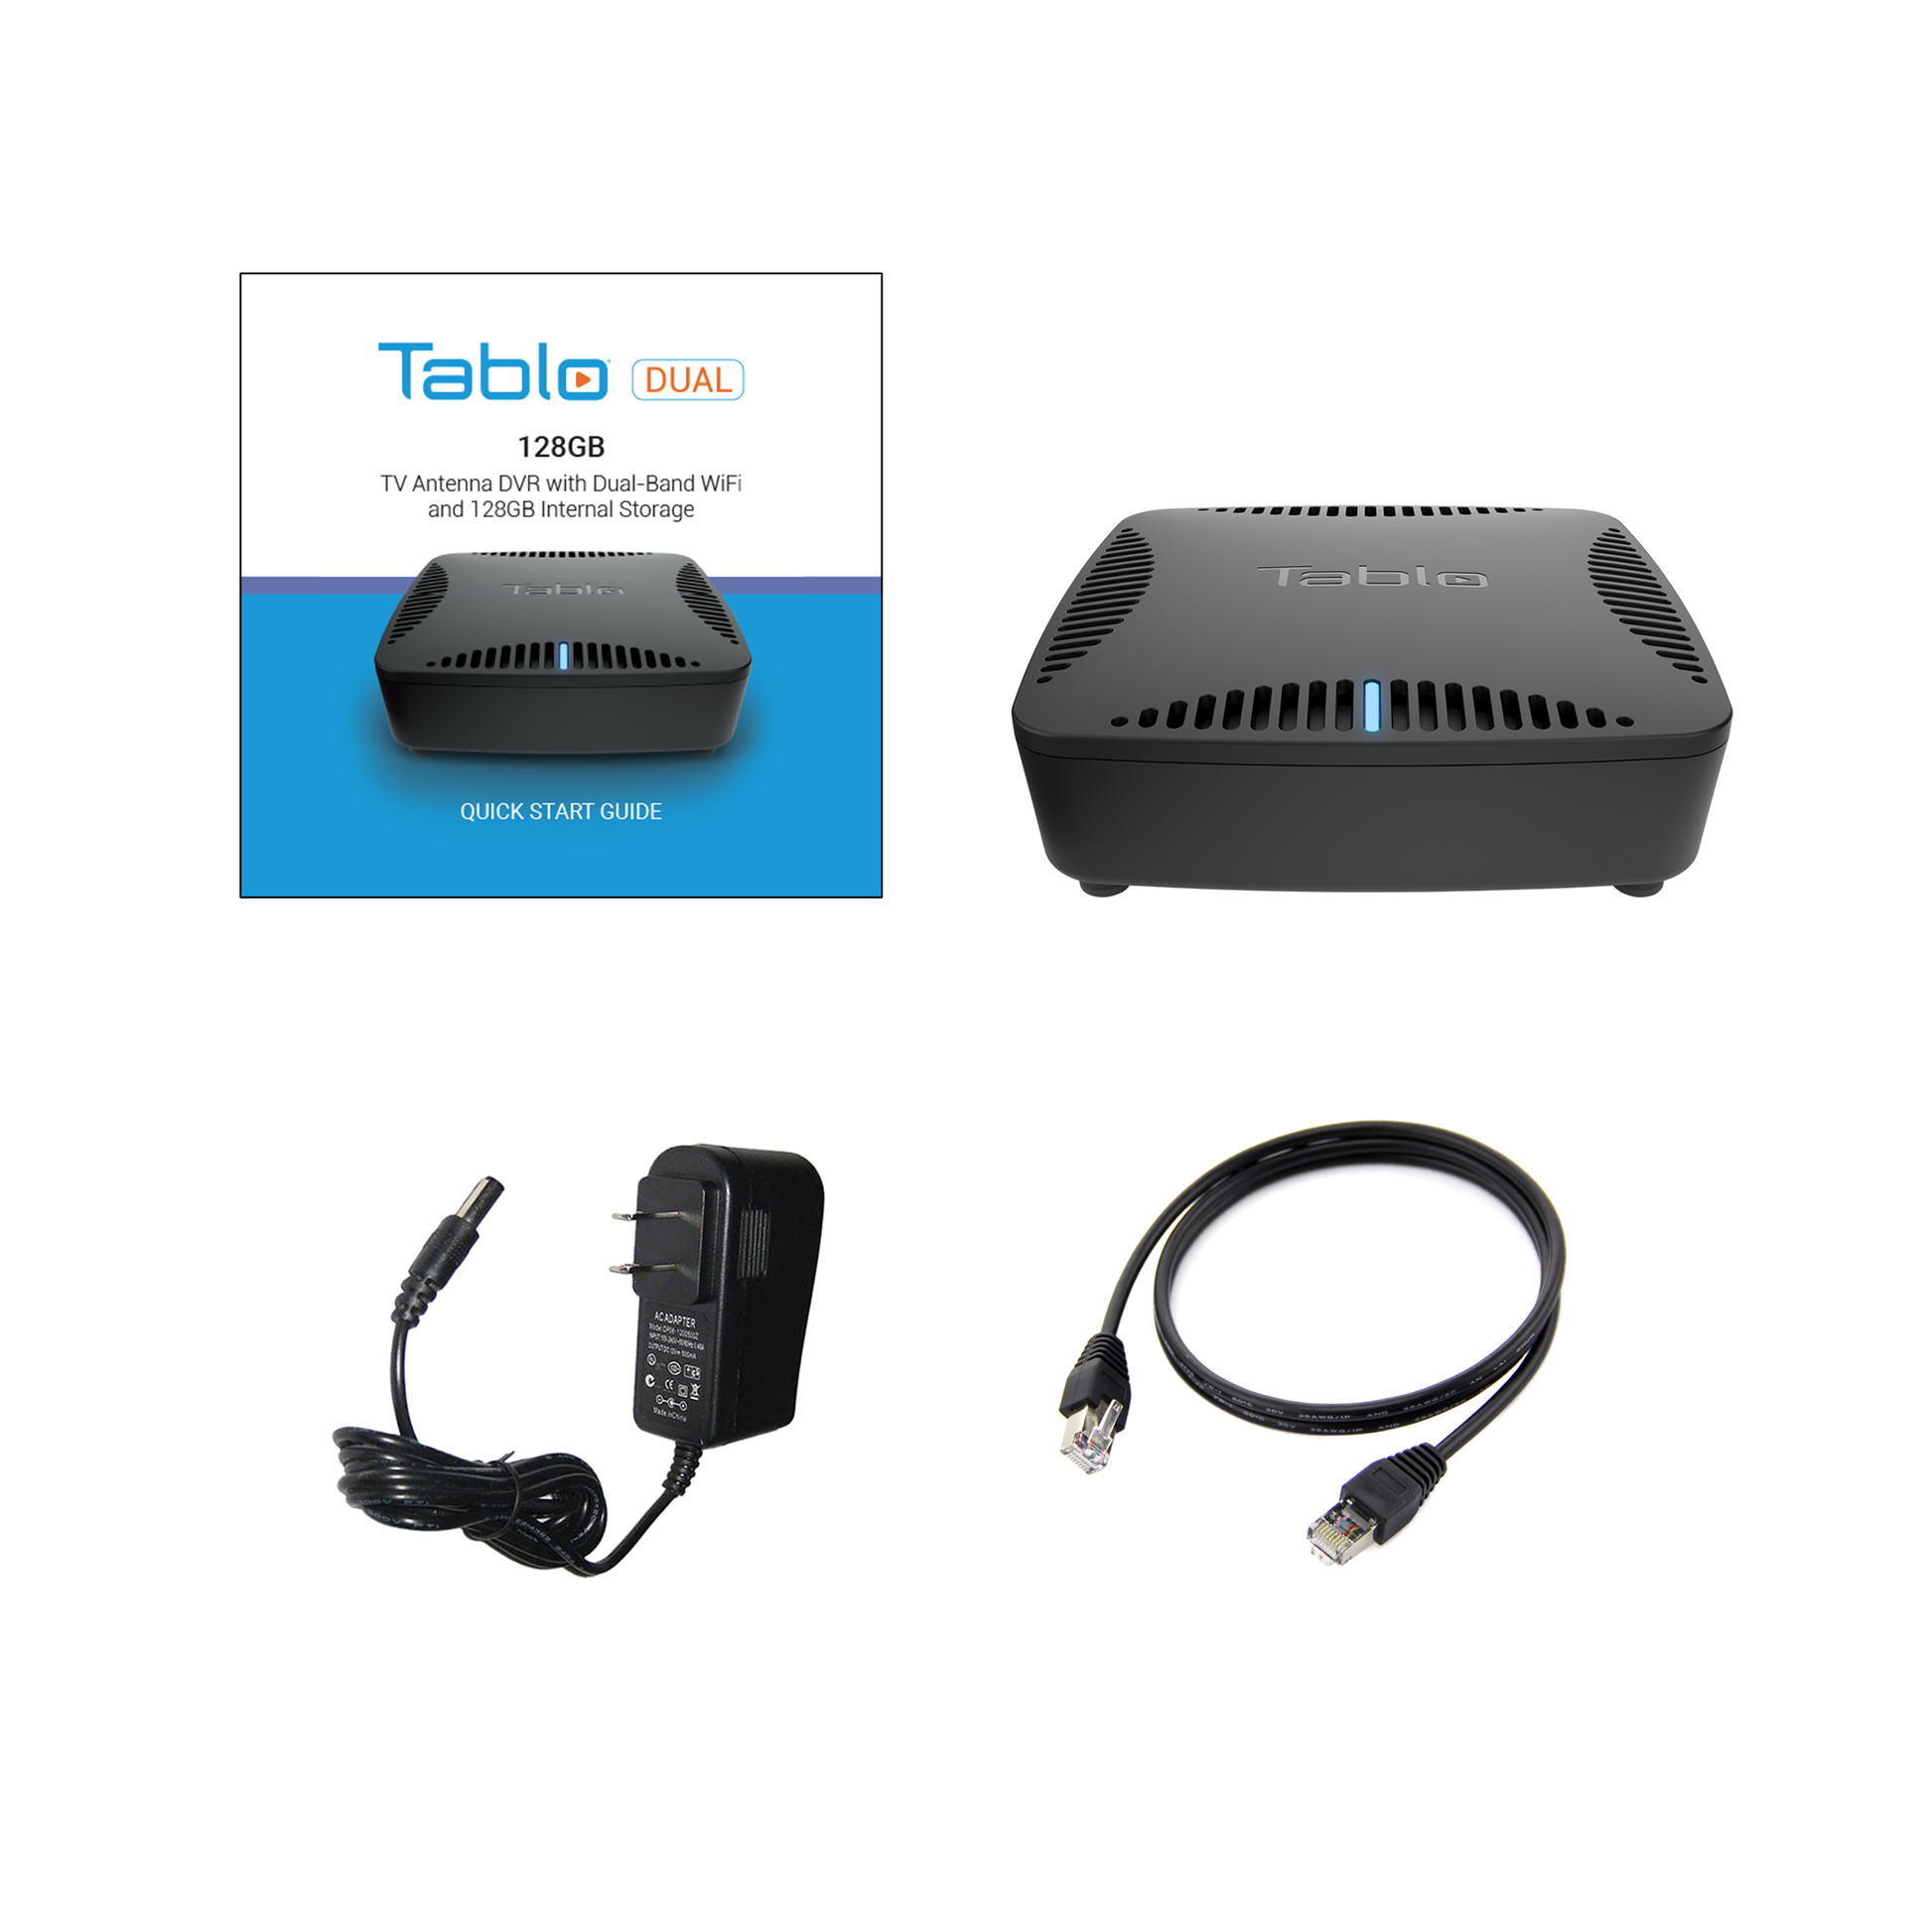 Tablo DUAL 128GB Over-The-Air (OTA) DVR (Digital Video Recorder) for Cord Cutters. What's in the box: Quick Start Guide, DVR hardware, Power adapter, Ethernet cable.